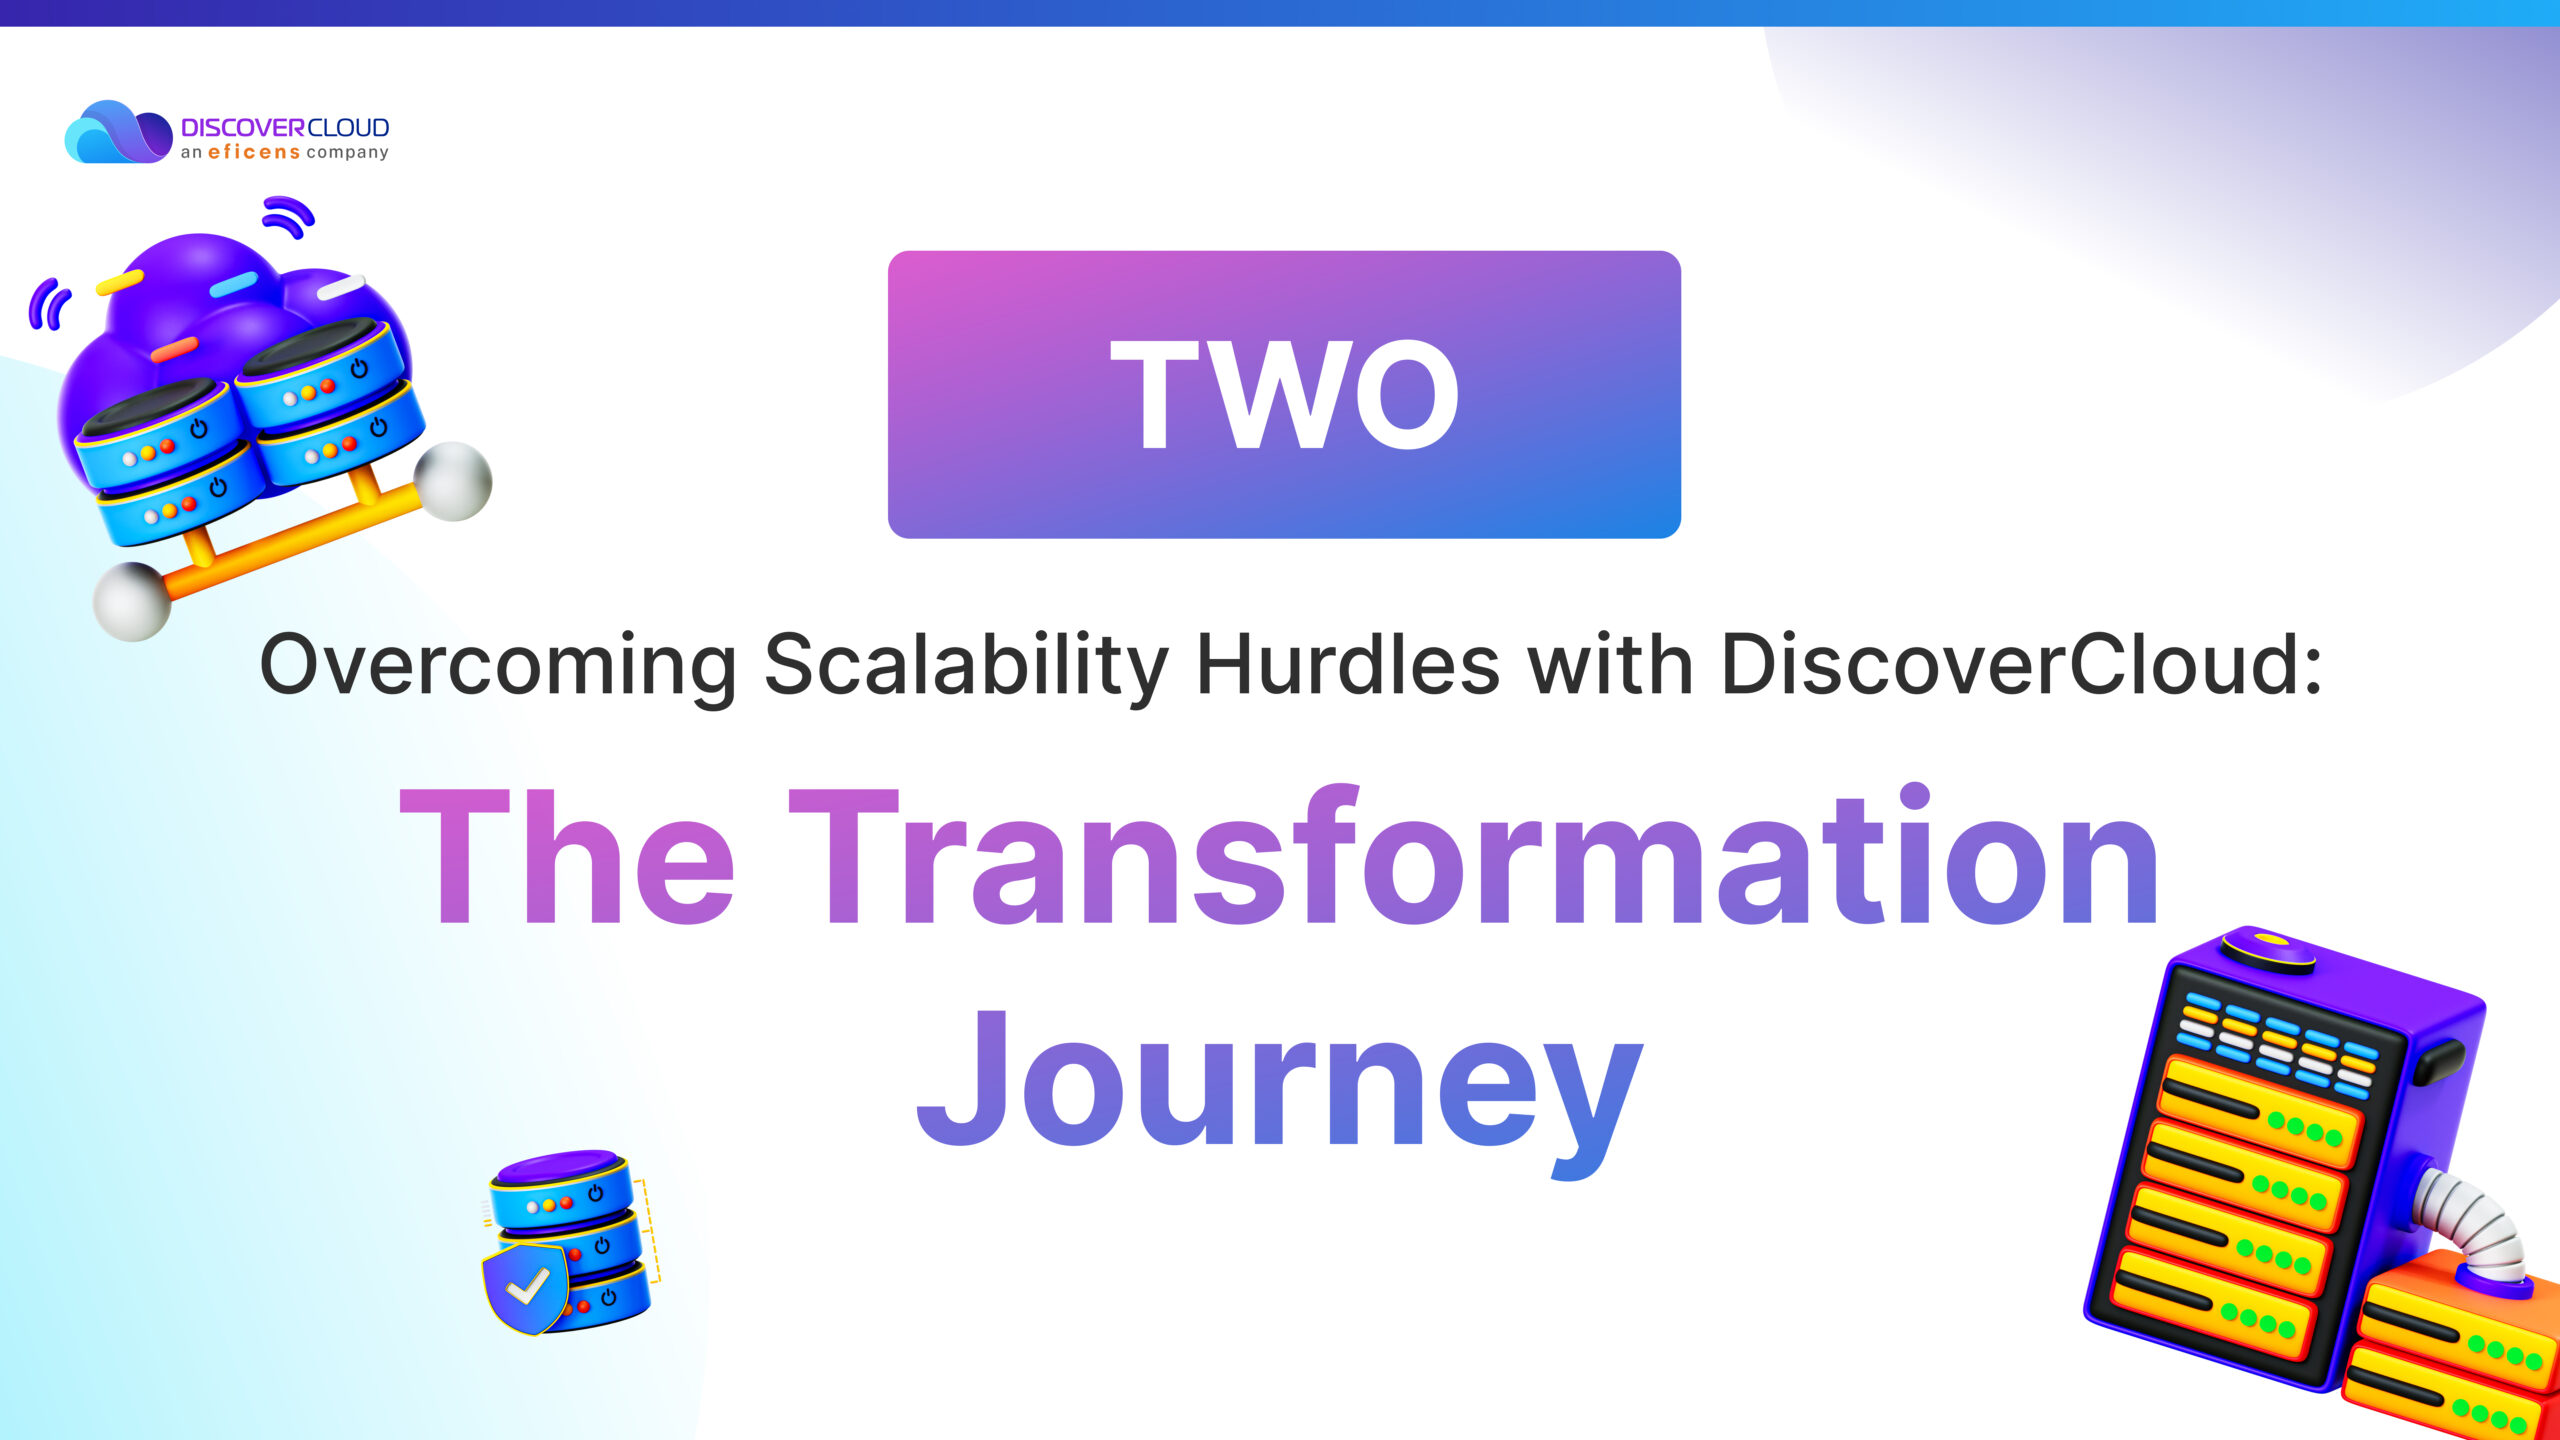 Overcoming Scalability Hurdles with DiscoverCloud: The Transformation Journey